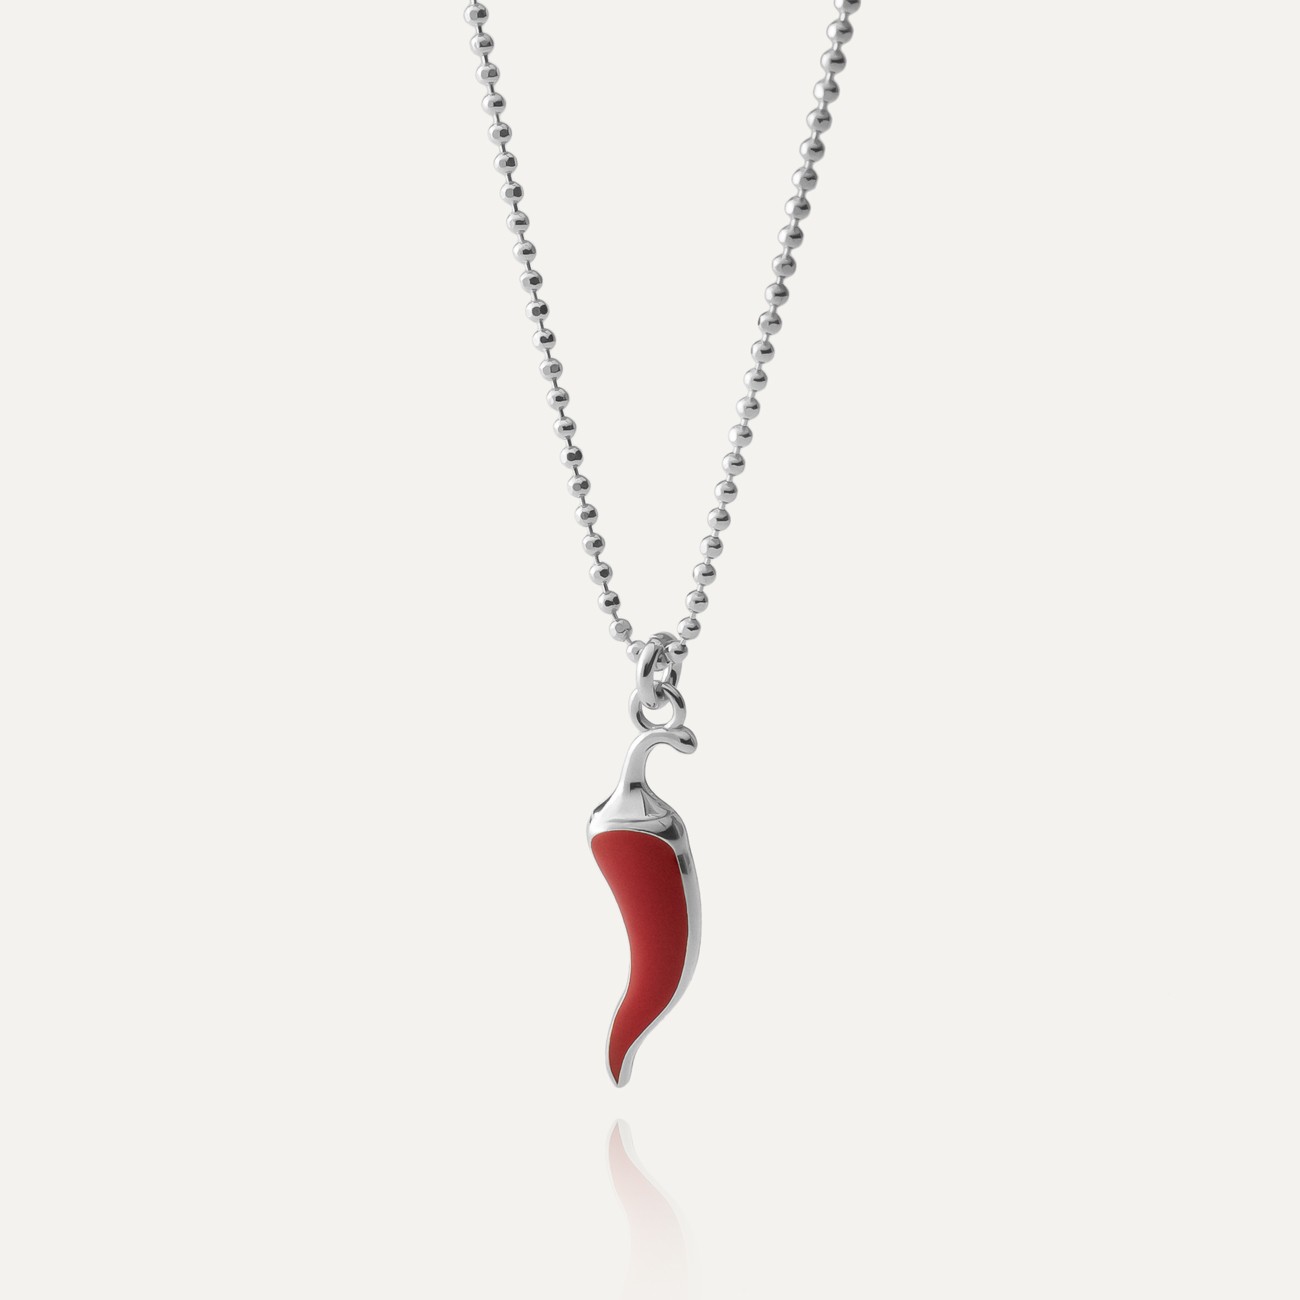 Chili pepper necklace, sterling silver 925